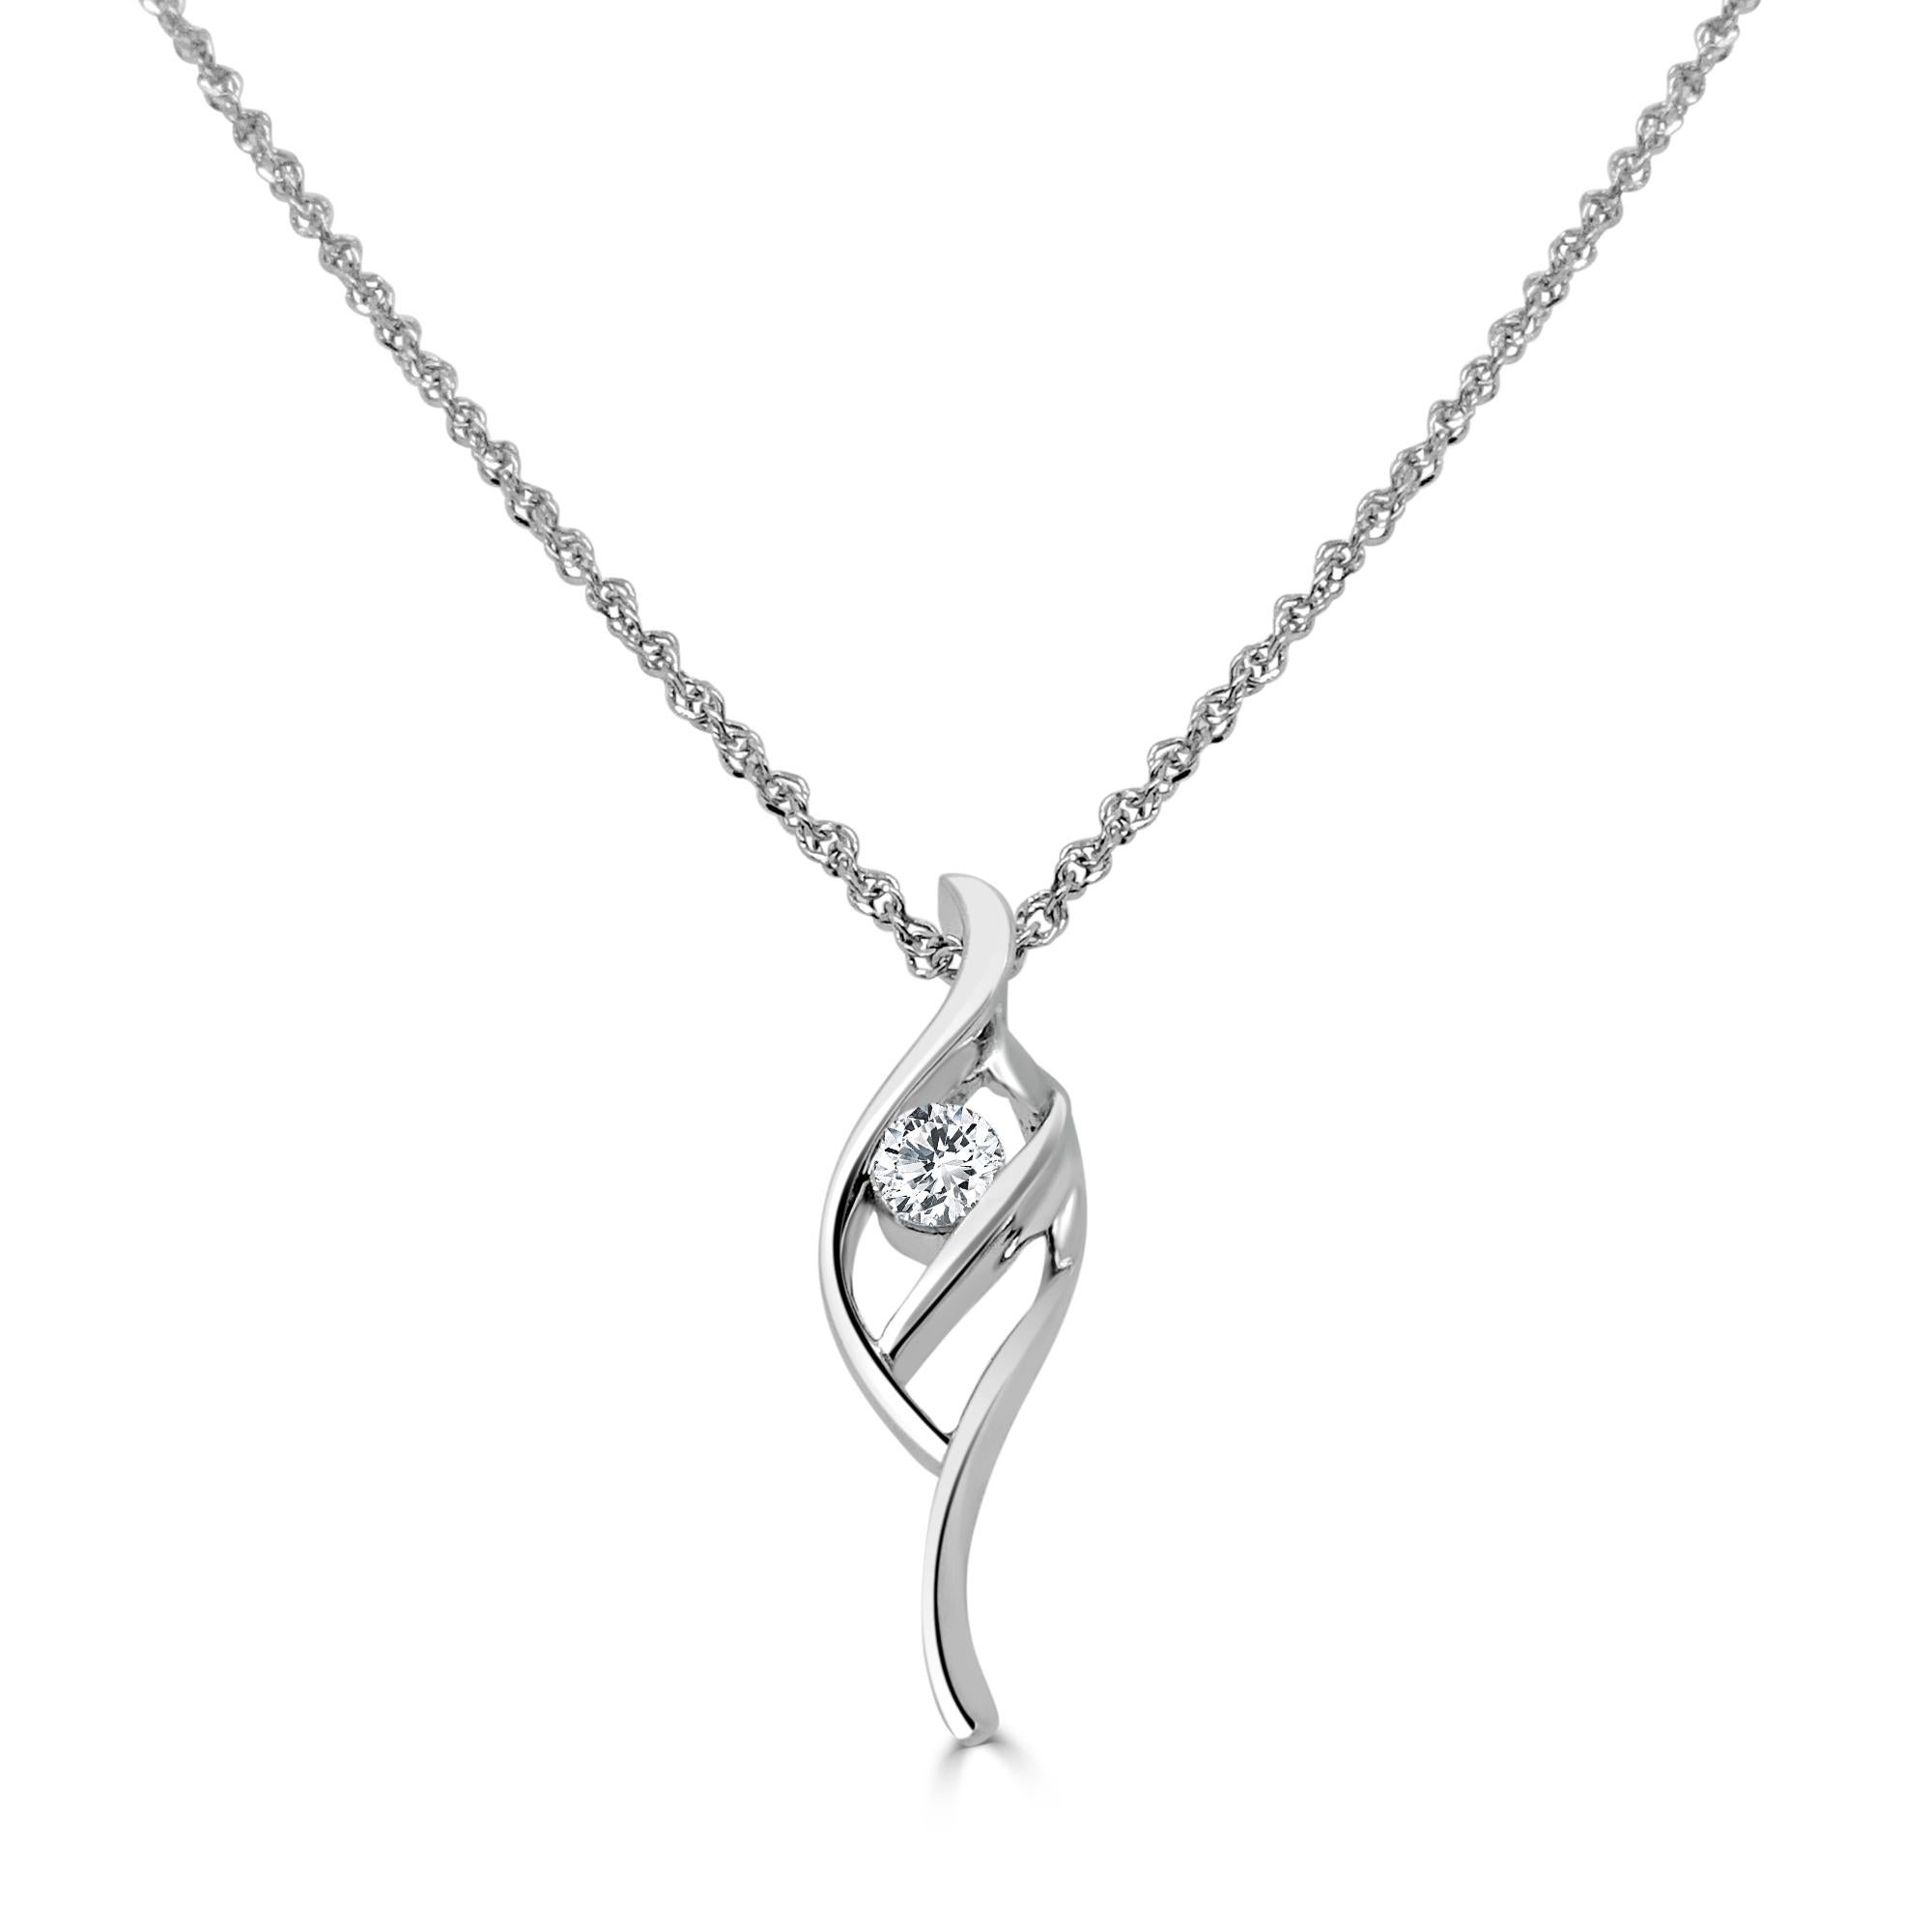 18 Karat White Gold 0.100 Carat Diamond Chain Necklace Wedding Fine Jewelry 

Gentle and elegant pendant is crafted in a sleek white gold. Featuring round cut diamonds, together totaling 0.100 TCW. Suspended from a 16-inch stunning non-tangle, non